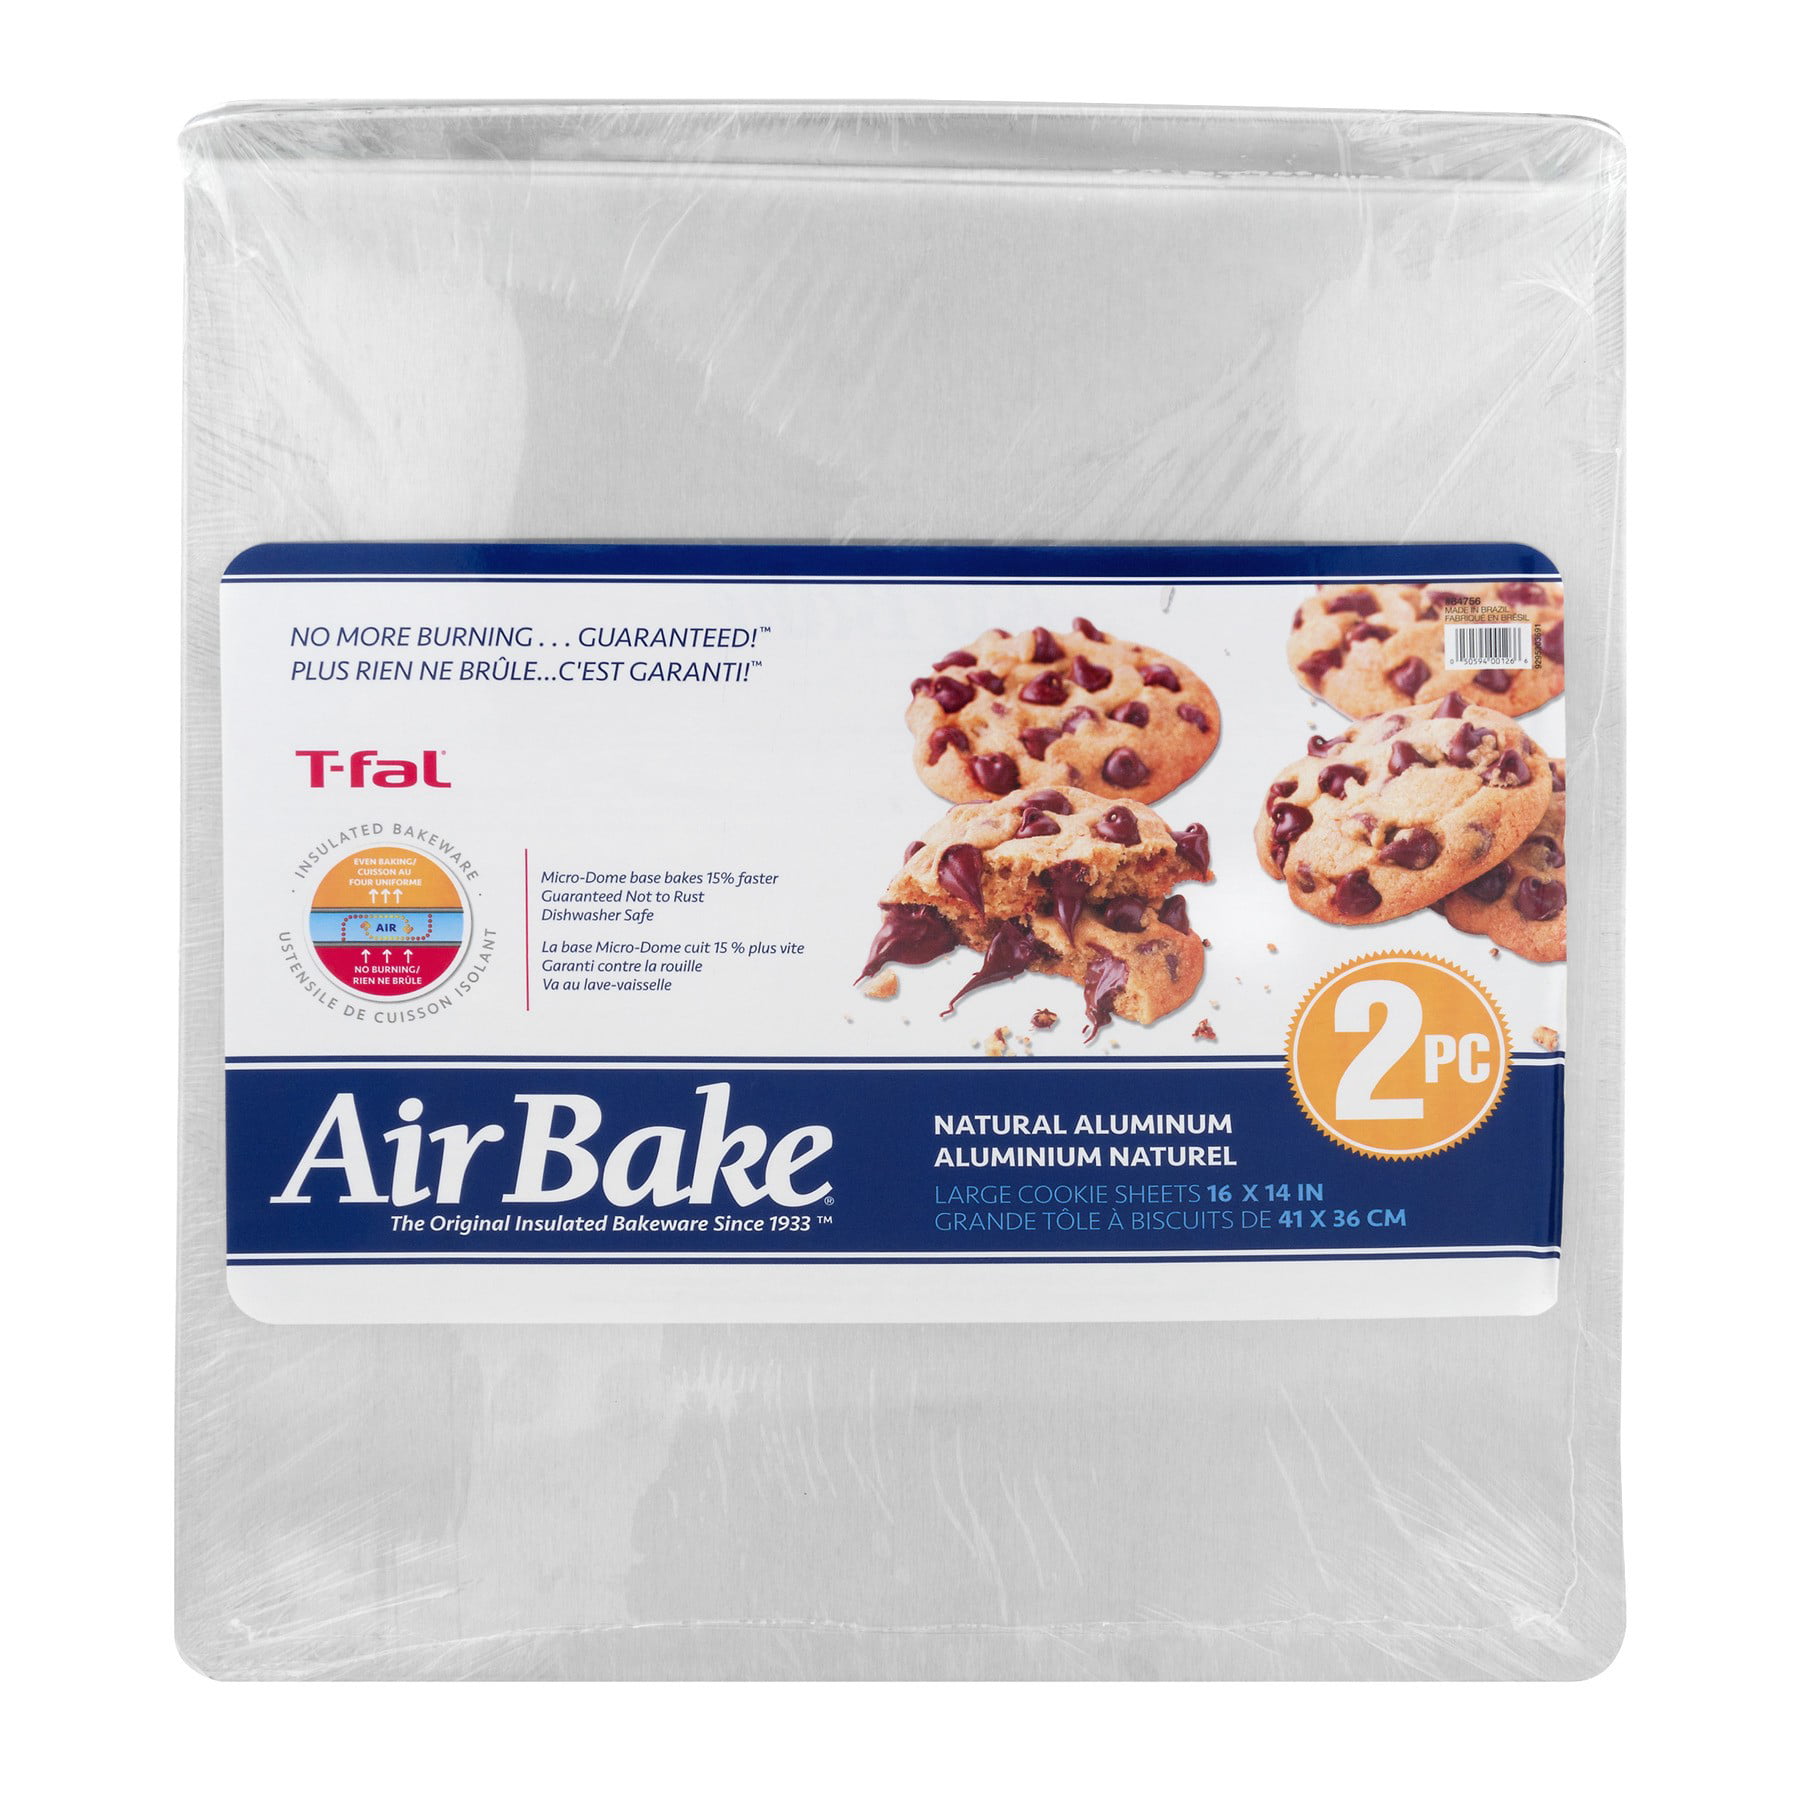 T Fal Airbake Natural Cookie Sheet 3 Piece Variety Set Silver - Office Depot